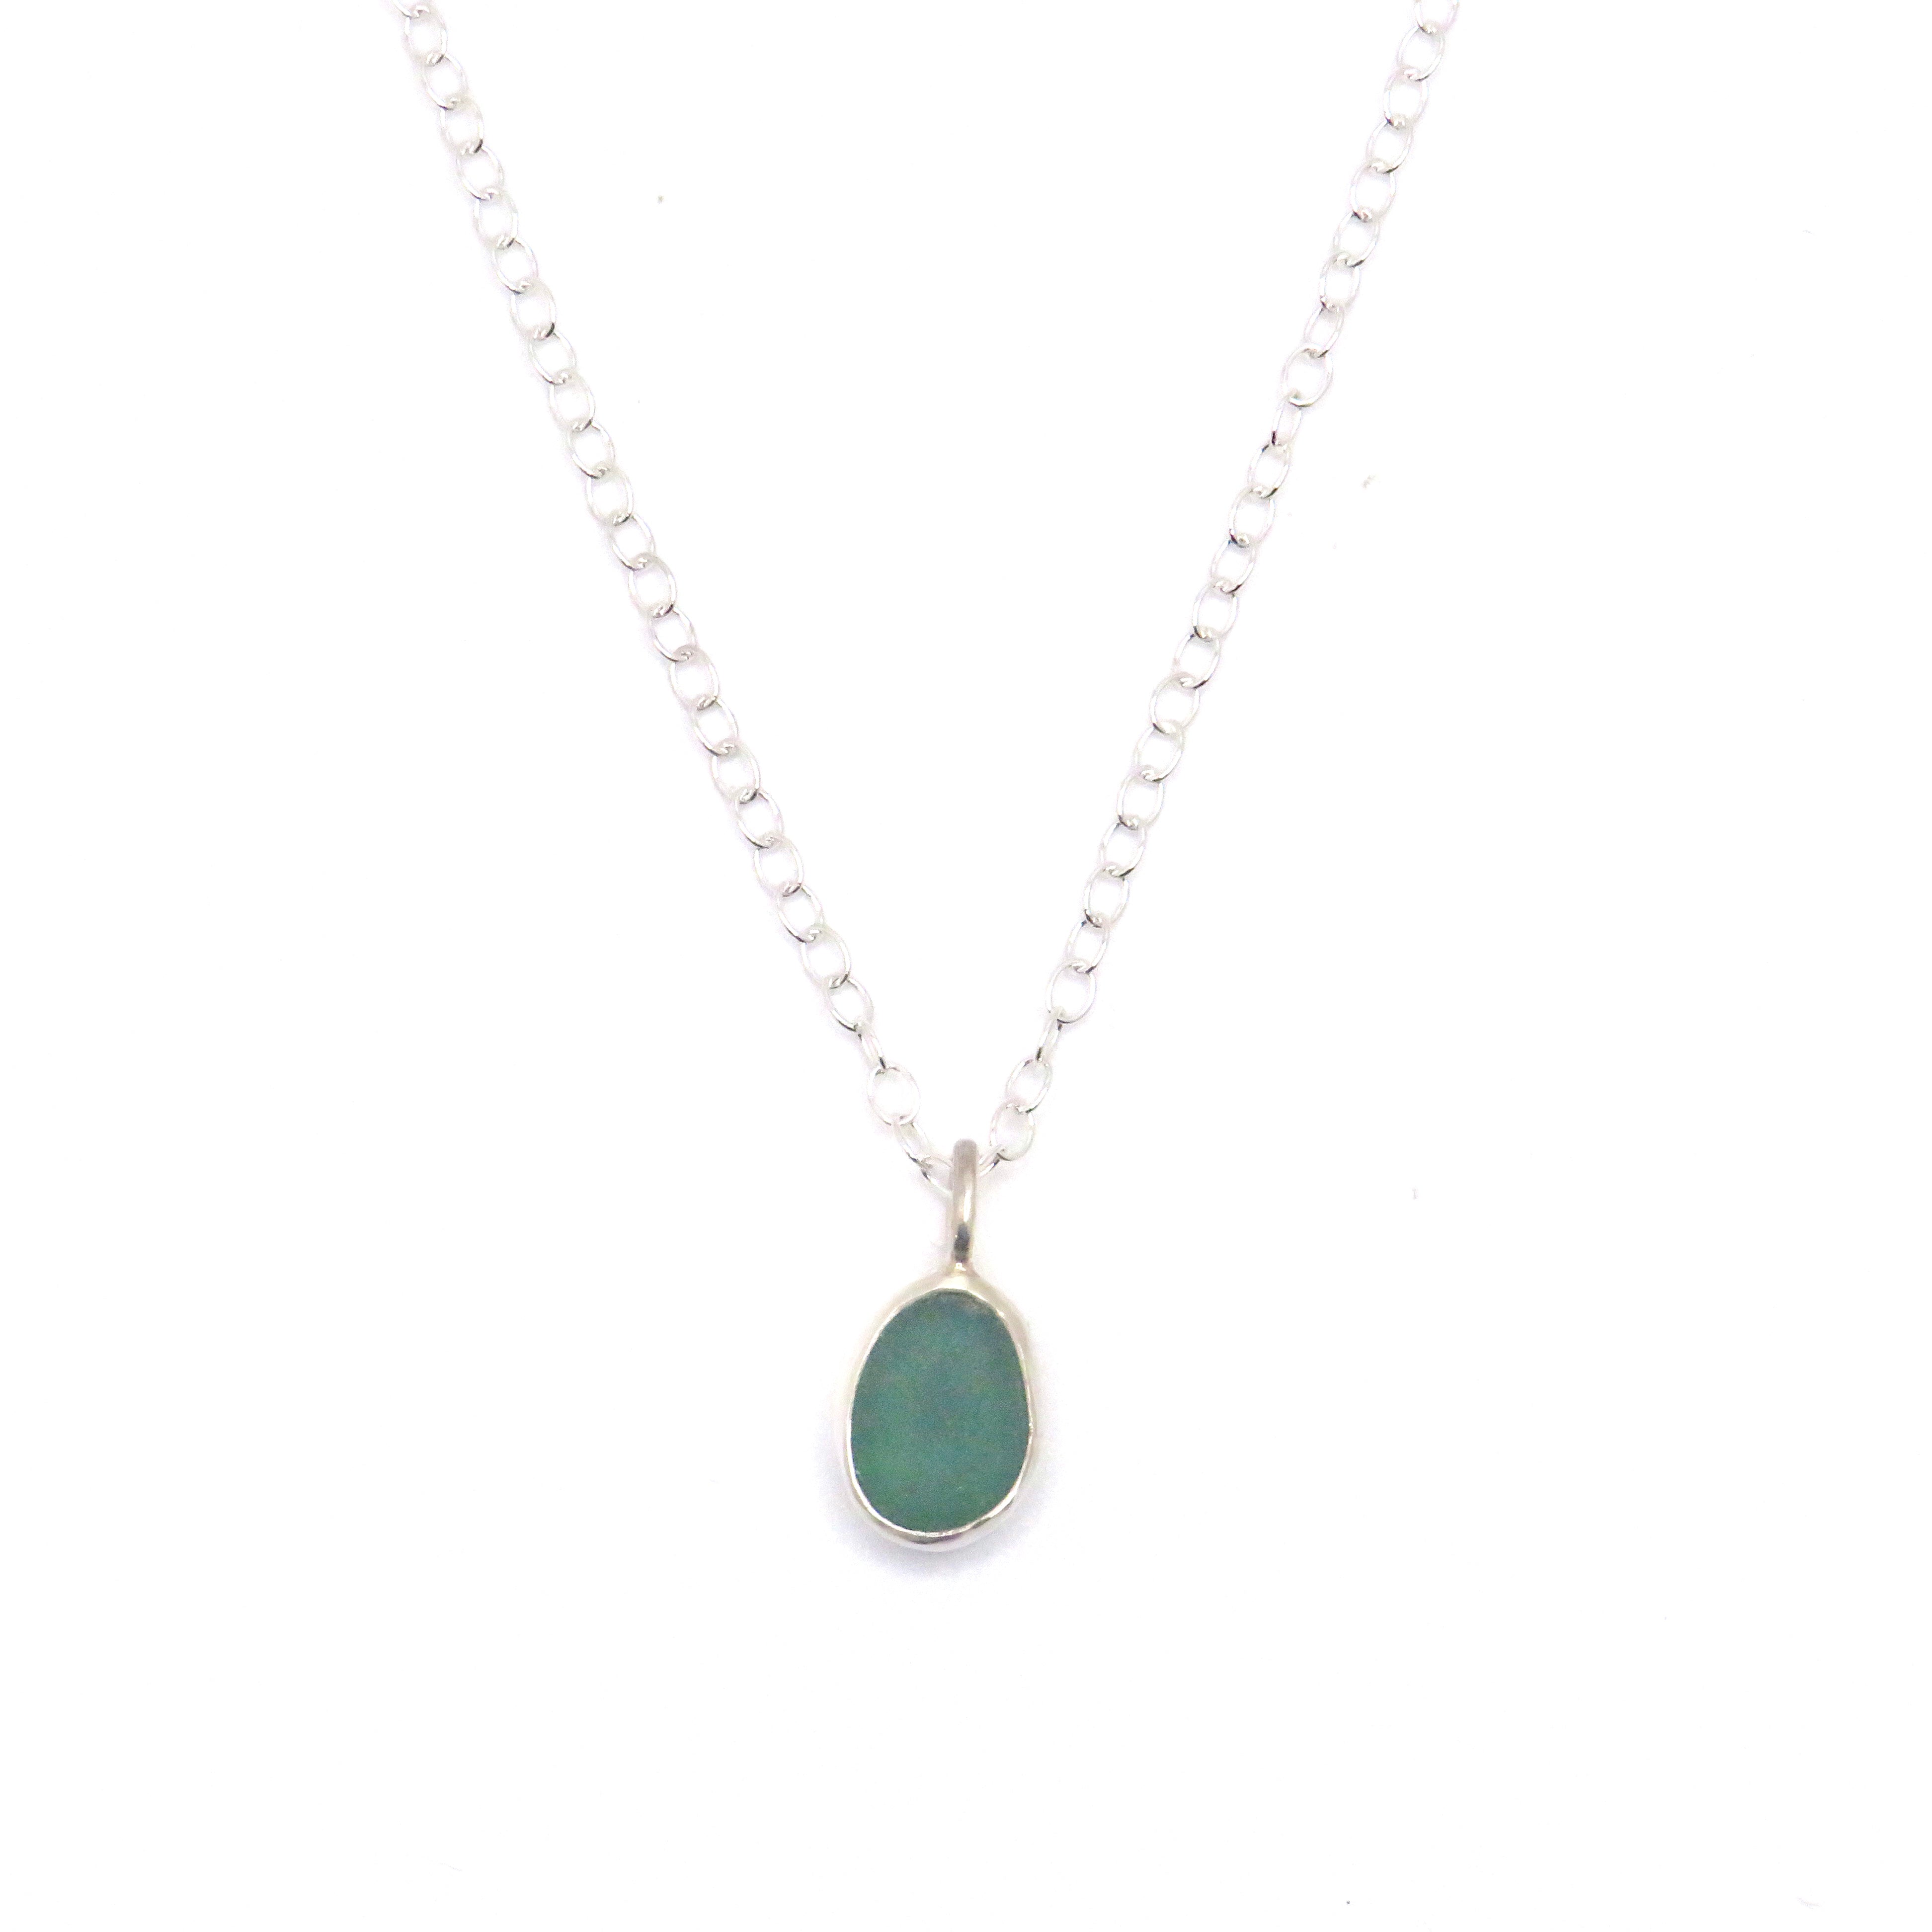 Green Sea Glass necklace